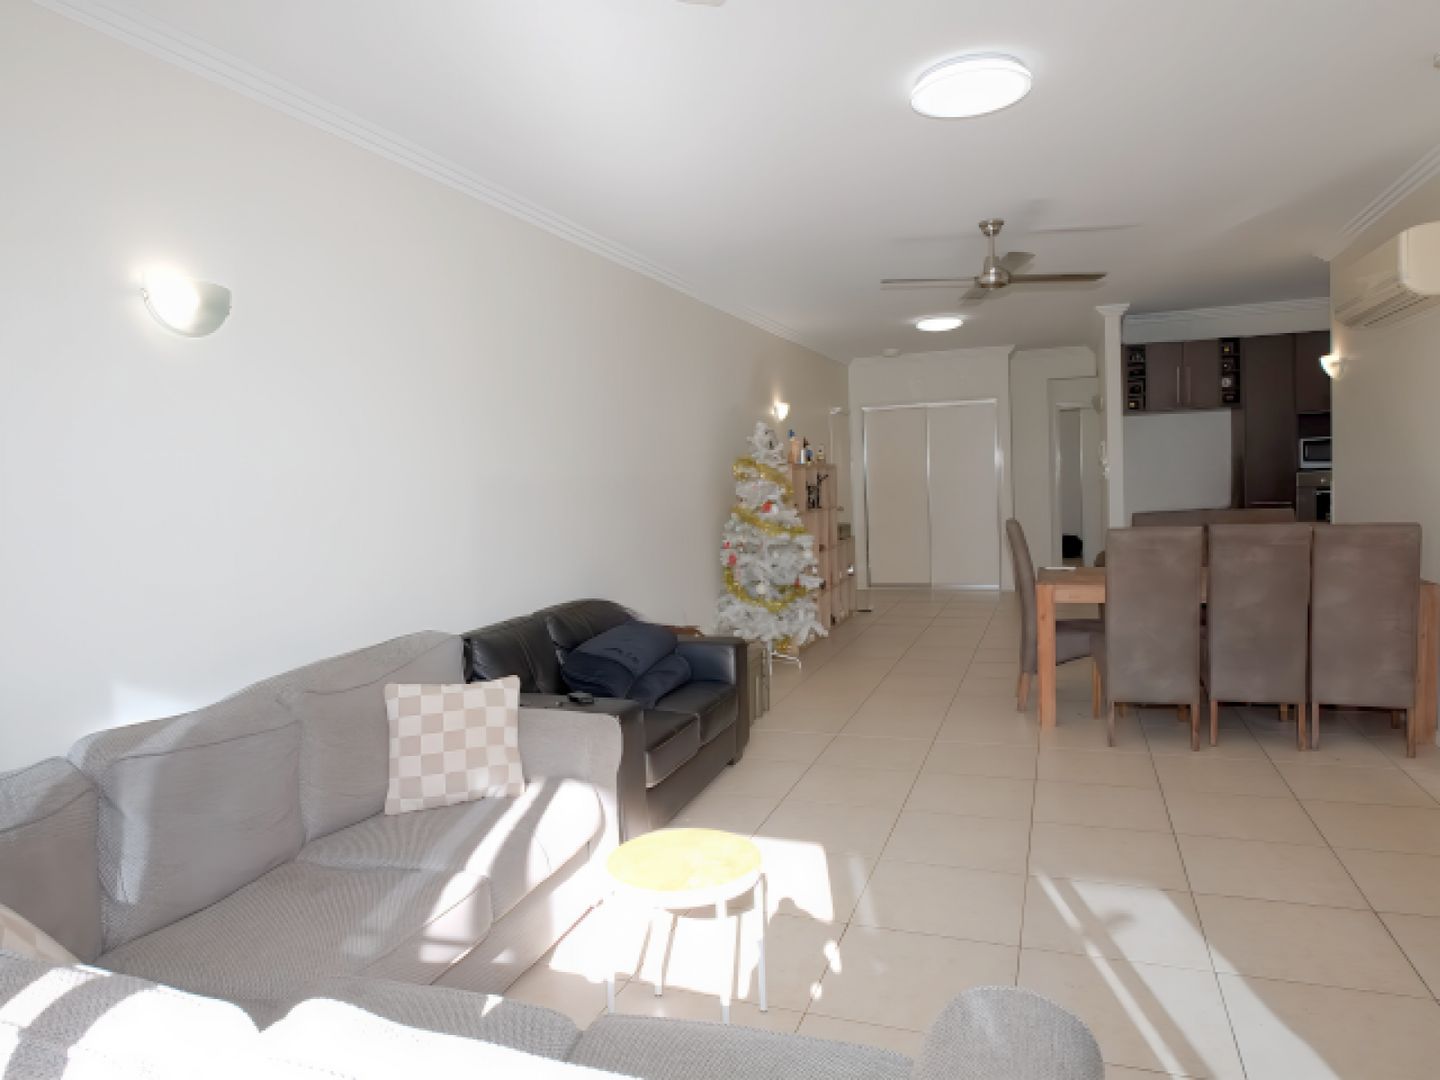 3 bedrooms Apartment / Unit / Flat in ID:21131227/523-541 Flinders Street TOWNSVILLE CITY QLD, 4810